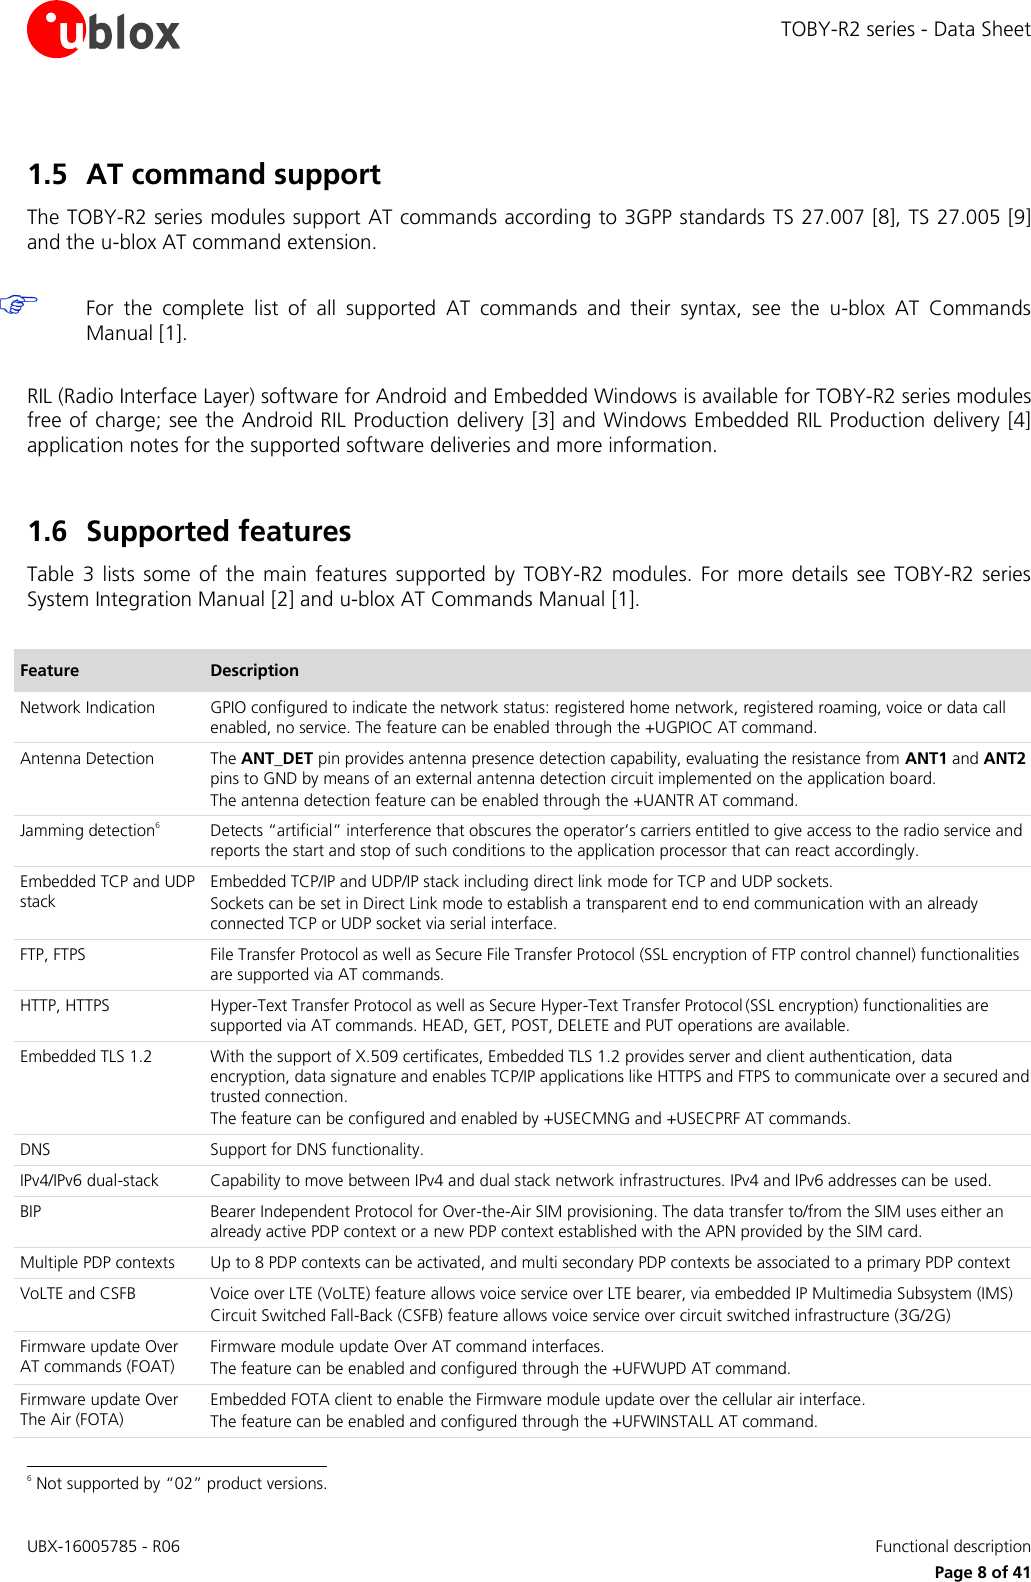 TOBY-R2 series - Data Sheet UBX-16005785 - R06    Functional description   Page 8 of 41 1.5 AT command support The TOBY-R2 series modules support AT commands according to 3GPP standards TS 27.007 [8], TS 27.005 [9] and the u-blox AT command extension.   For  the  complete  list  of  all  supported  AT  commands  and  their  syntax,  see  the  u-blox  AT  Commands Manual [1].  RIL (Radio Interface Layer) software for Android and Embedded Windows is available for TOBY-R2 series modules free of charge; see the Android RIL Production delivery  [3] and Windows Embedded RIL Production delivery  [4] application notes for the supported software deliveries and more information.  1.6 Supported features Table  3  lists  some  of  the  main  features  supported  by  TOBY-R2  modules.  For  more  details  see  TOBY-R2  series System Integration Manual [2] and u-blox AT Commands Manual [1].  Feature Description Network Indication GPIO configured to indicate the network status: registered home network, registered roaming, voice or data call enabled, no service. The feature can be enabled through the +UGPIOC AT command. Antenna Detection The ANT_DET pin provides antenna presence detection capability, evaluating the resistance from ANT1 and ANT2 pins to GND by means of an external antenna detection circuit implemented on the application board.  The antenna detection feature can be enabled through the +UANTR AT command. Jamming detection6 Detects “artificial” interference that obscures the operator’s carriers entitled to give access to the radio service and reports the start and stop of such conditions to the application processor that can react accordingly. Embedded TCP and UDP stack Embedded TCP/IP and UDP/IP stack including direct link mode for TCP and UDP sockets. Sockets can be set in Direct Link mode to establish a transparent end to end communication with an already connected TCP or UDP socket via serial interface. FTP, FTPS File Transfer Protocol as well as Secure File Transfer Protocol (SSL encryption of FTP control channel) functionalities are supported via AT commands. HTTP, HTTPS Hyper-Text Transfer Protocol as well as Secure Hyper-Text Transfer Protocol (SSL encryption) functionalities are supported via AT commands. HEAD, GET, POST, DELETE and PUT operations are available. Embedded TLS 1.2 With the support of X.509 certificates, Embedded TLS 1.2 provides server and client authentication, data encryption, data signature and enables TCP/IP applications like HTTPS and FTPS to communicate over a secured and trusted connection. The feature can be configured and enabled by +USECMNG and +USECPRF AT commands. DNS Support for DNS functionality. IPv4/IPv6 dual-stack Capability to move between IPv4 and dual stack network infrastructures. IPv4 and IPv6 addresses can be used. BIP Bearer Independent Protocol for Over-the-Air SIM provisioning. The data transfer to/from the SIM uses either an already active PDP context or a new PDP context established with the APN provided by the SIM card. Multiple PDP contexts Up to 8 PDP contexts can be activated, and multi secondary PDP contexts be associated to a primary PDP context VoLTE and CSFB Voice over LTE (VoLTE) feature allows voice service over LTE bearer, via embedded IP Multimedia Subsystem (IMS) Circuit Switched Fall-Back (CSFB) feature allows voice service over circuit switched infrastructure (3G/2G) Firmware update Over AT commands (FOAT) Firmware module update Over AT command interfaces. The feature can be enabled and configured through the +UFWUPD AT command. Firmware update Over The Air (FOTA)  Embedded FOTA client to enable the Firmware module update over the cellular air interface. The feature can be enabled and configured through the +UFWINSTALL AT command.                                                       6 Not supported by “02” product versions. 